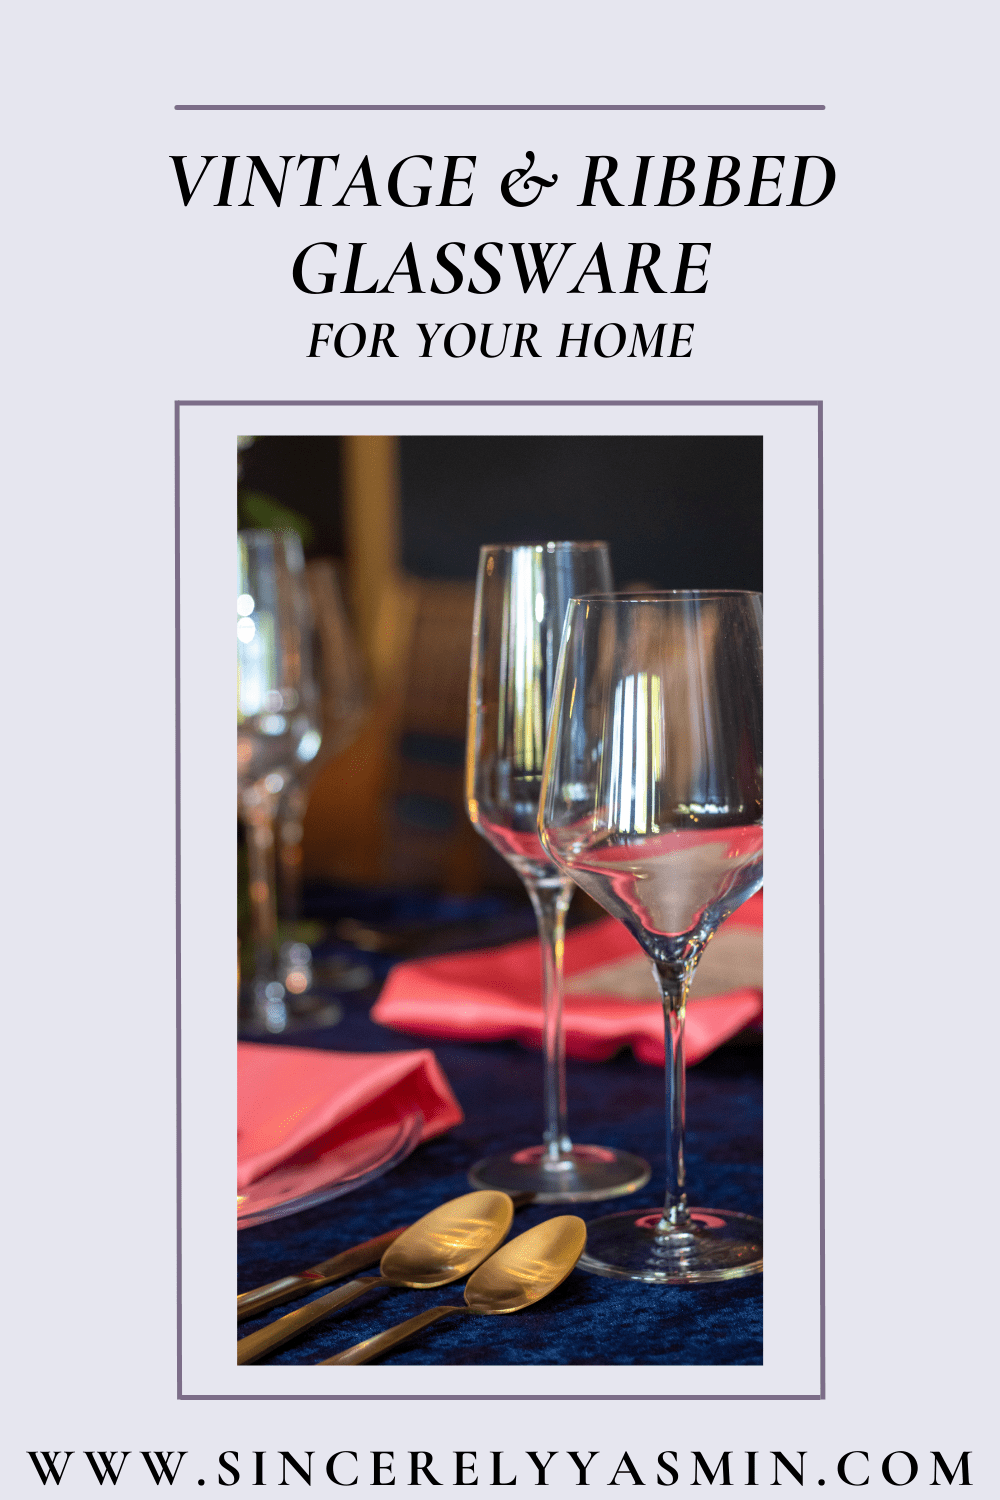 Vintage & Ribbed Glassware for Your Home | Picture shows a table setting with wine glasses